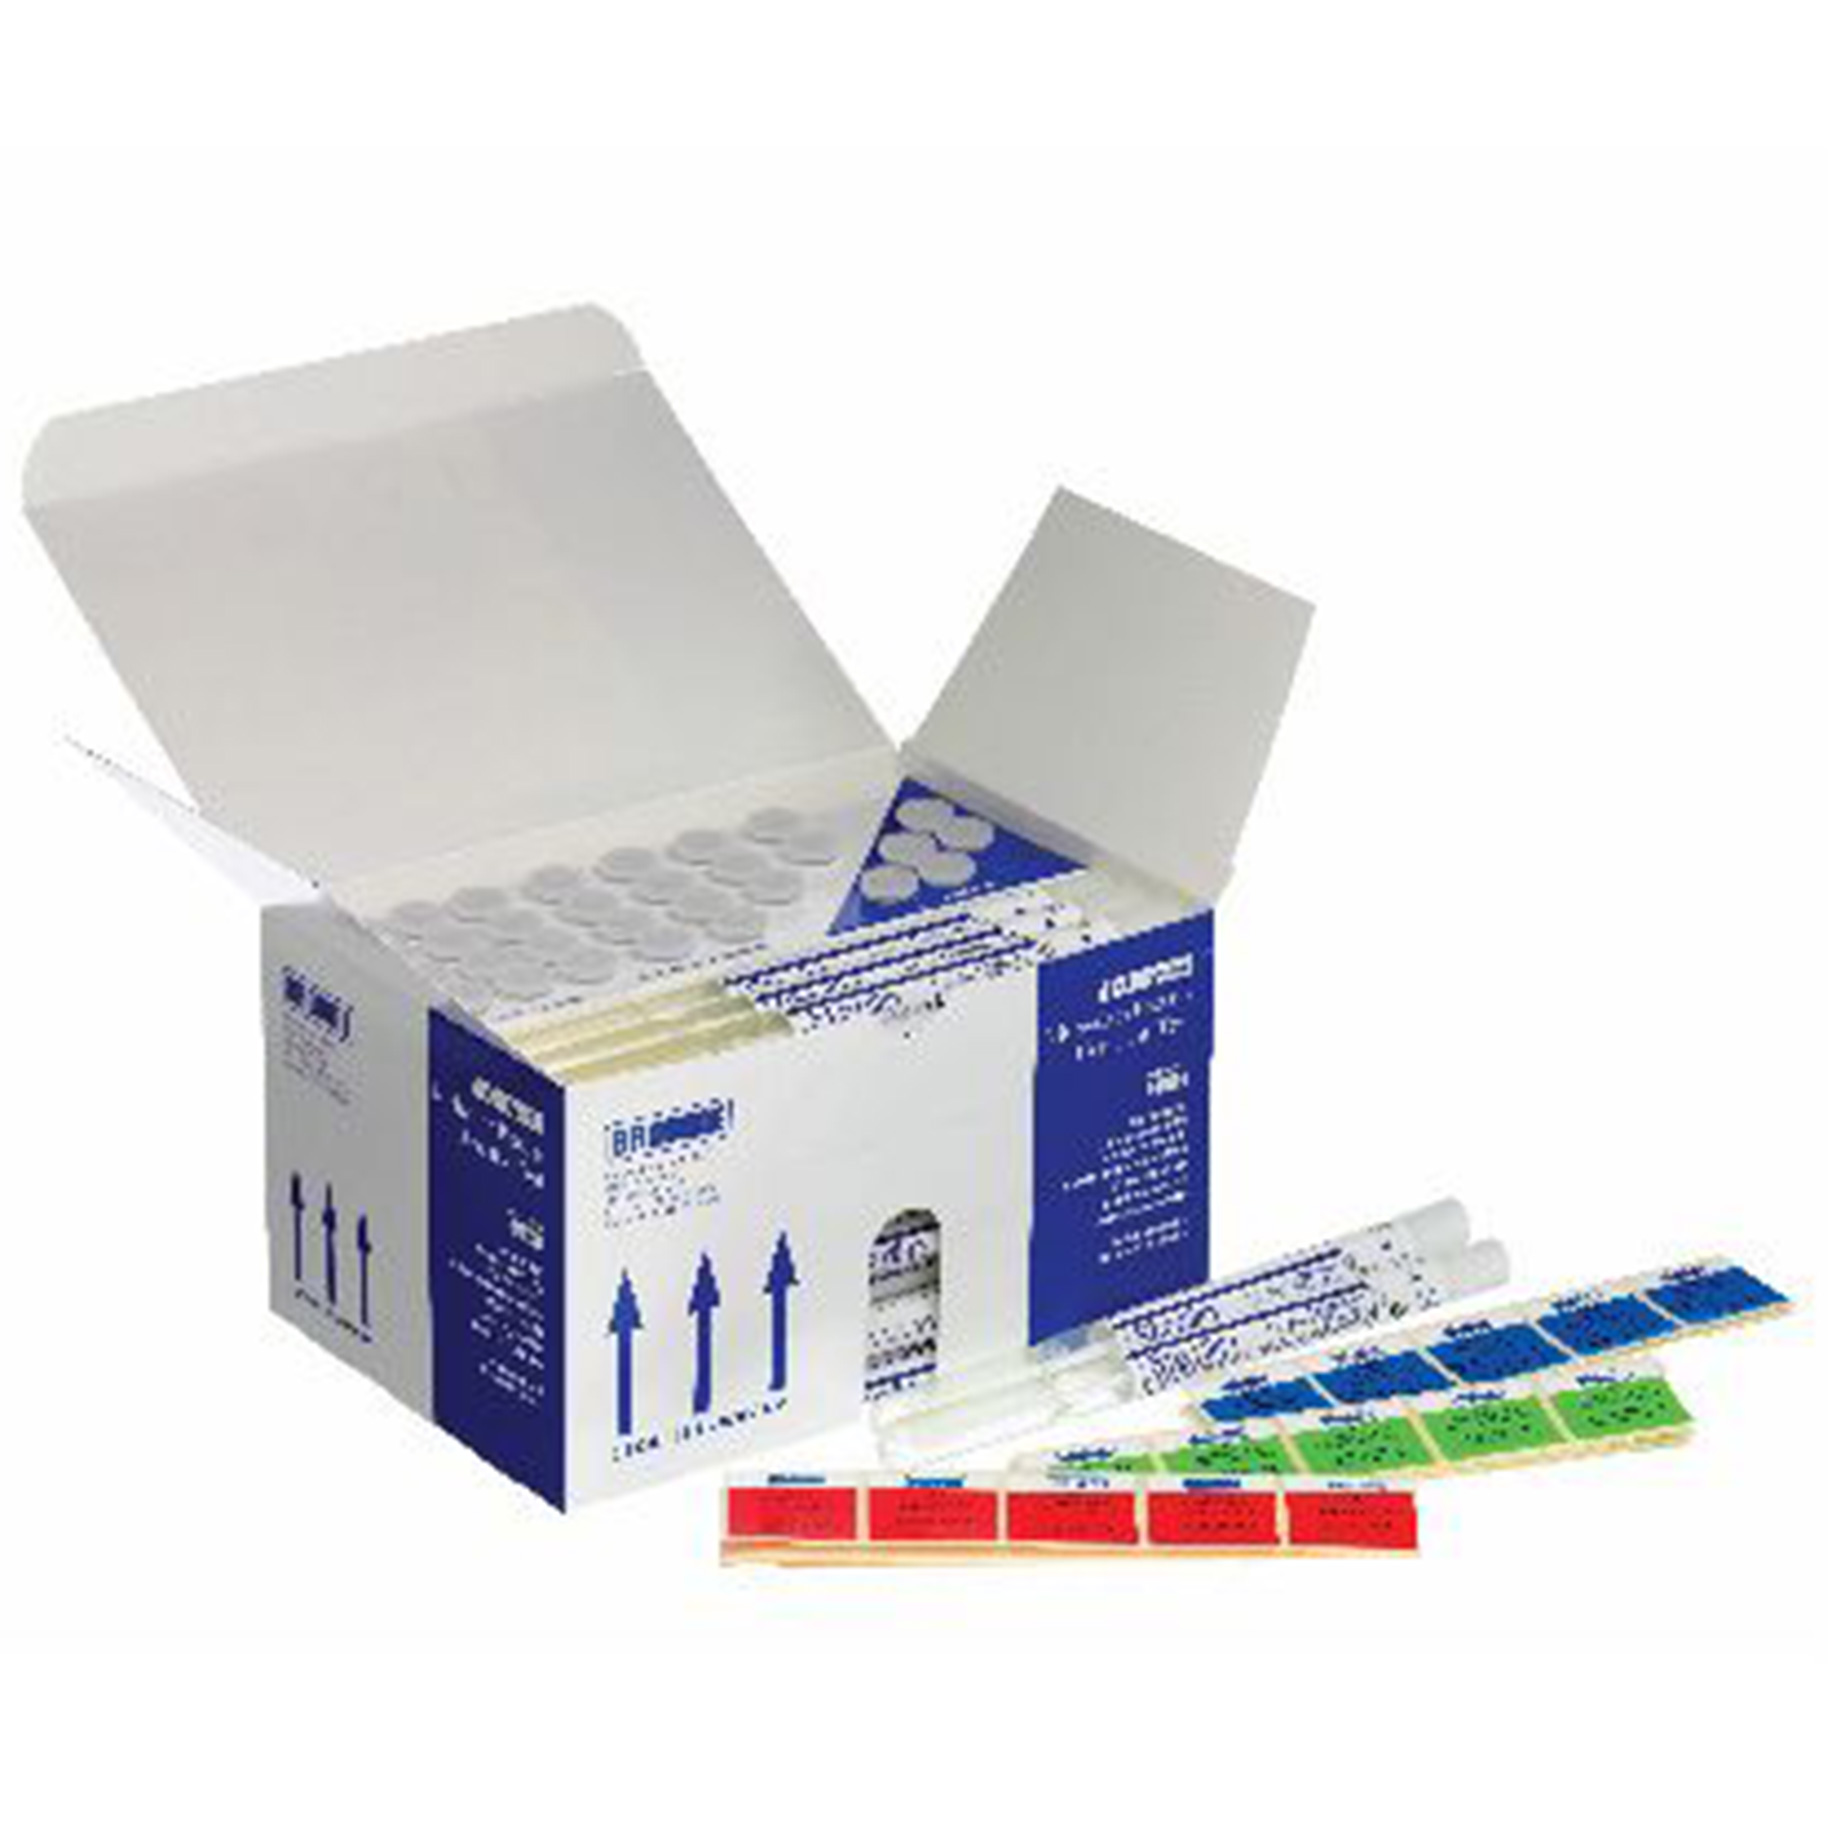 Ninhydrin Protein Detection Kits Weekly Tests Bulk Pack 